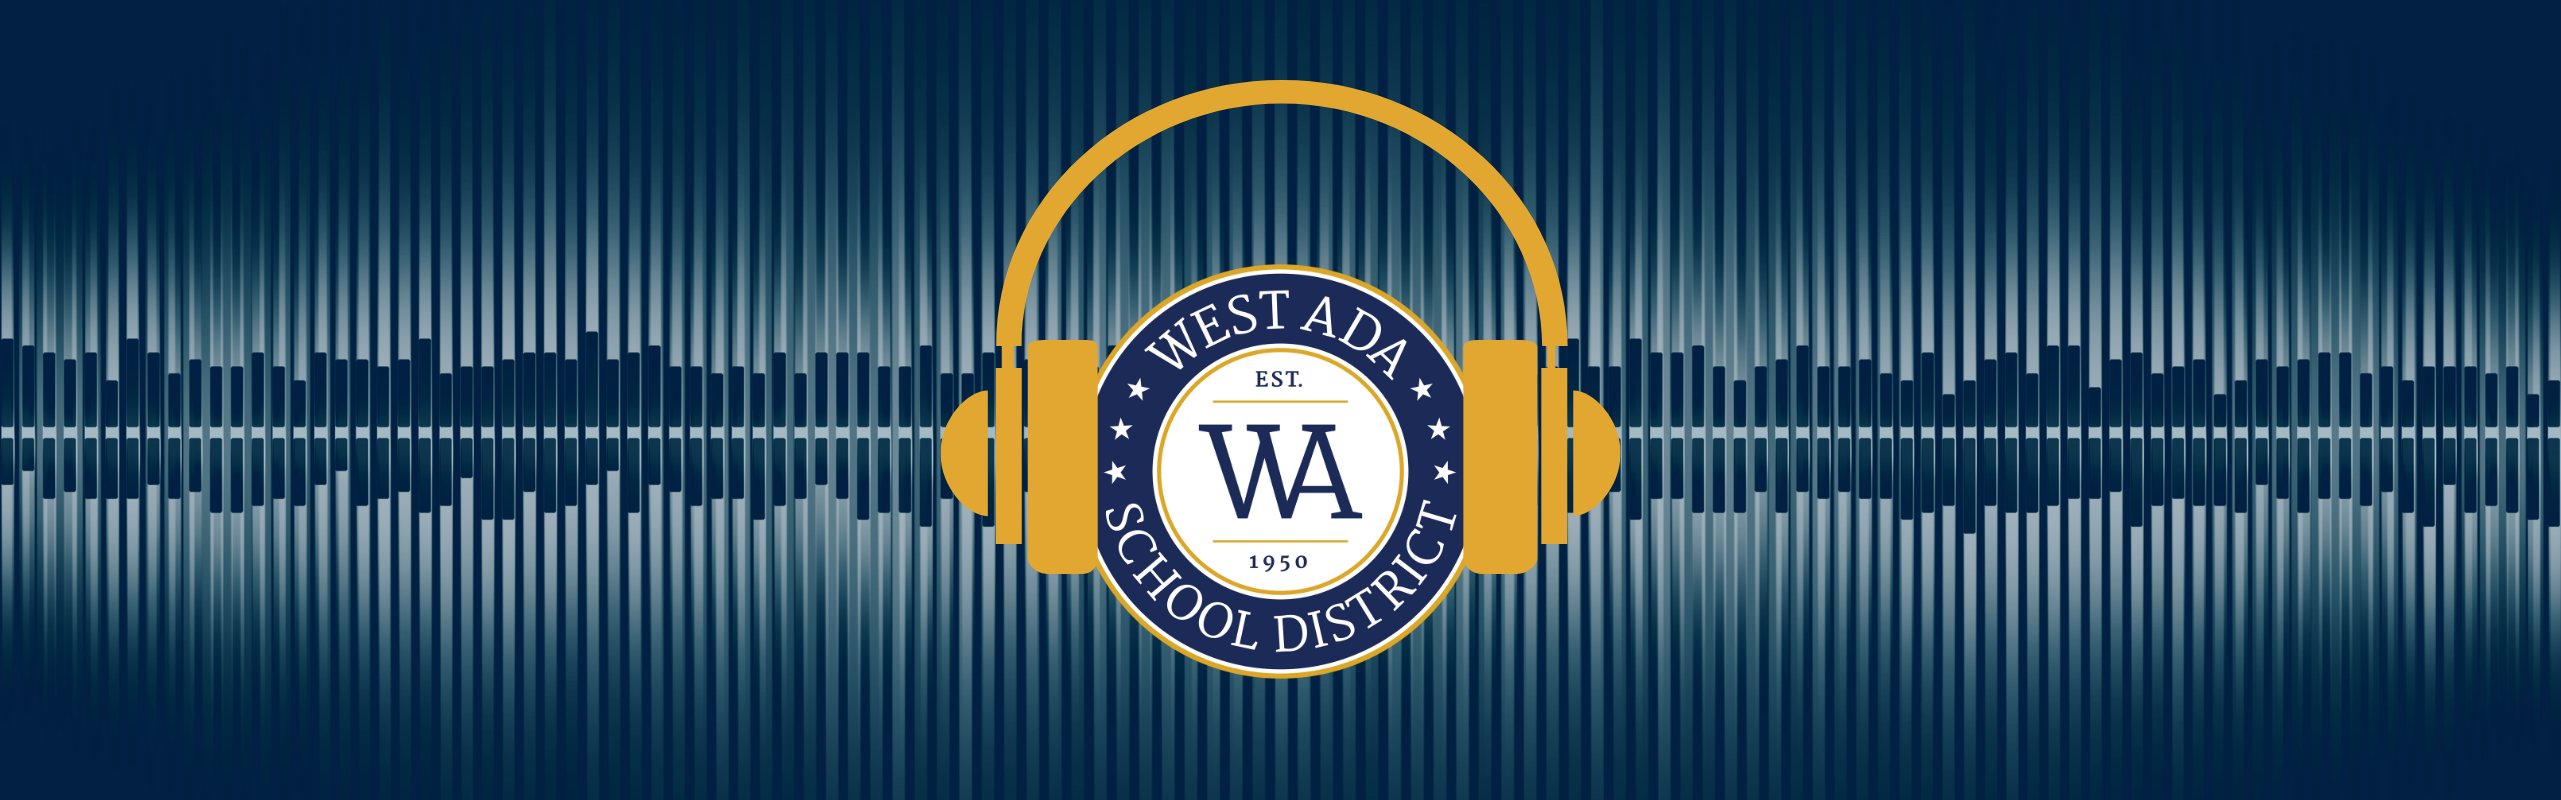 West Ada circular logo with yellow headphones around it - soundwaves in the background